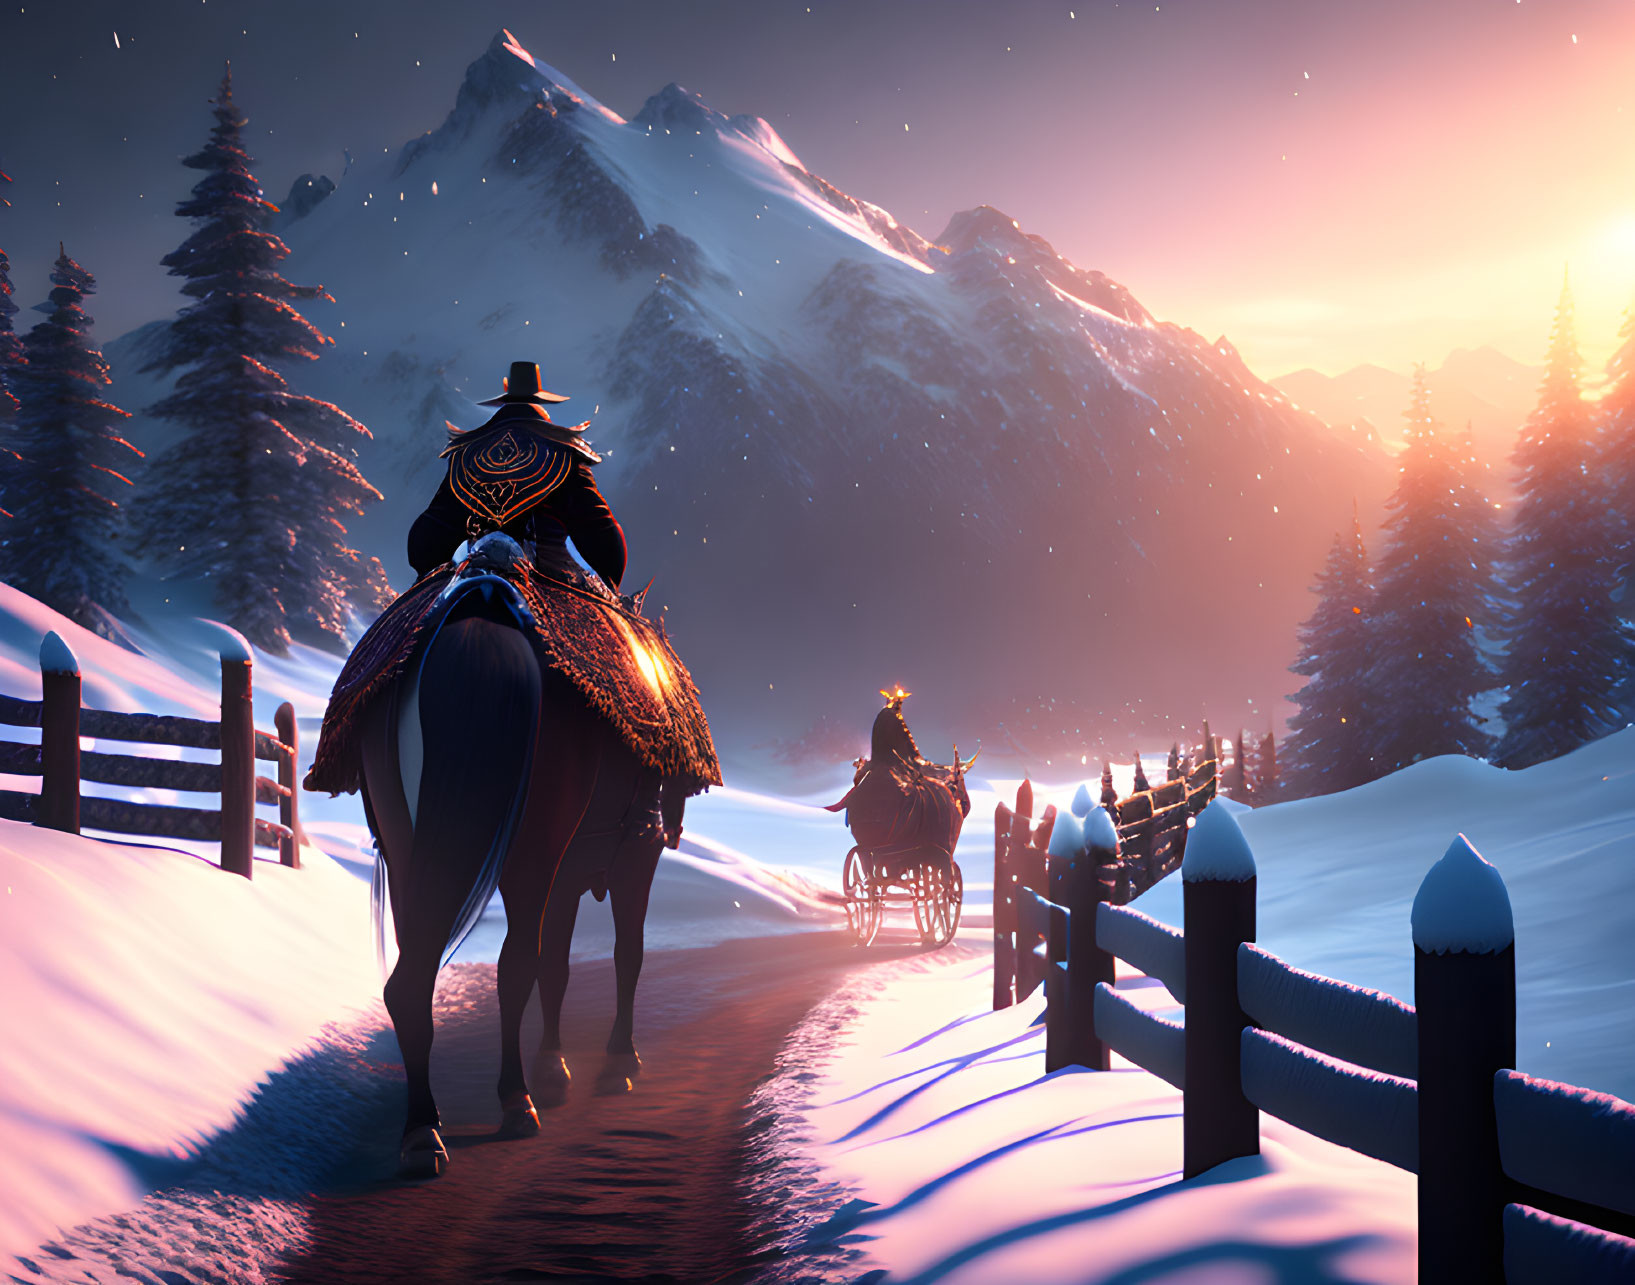 Snowy path with horseback rider and carriage under pink sunset sky